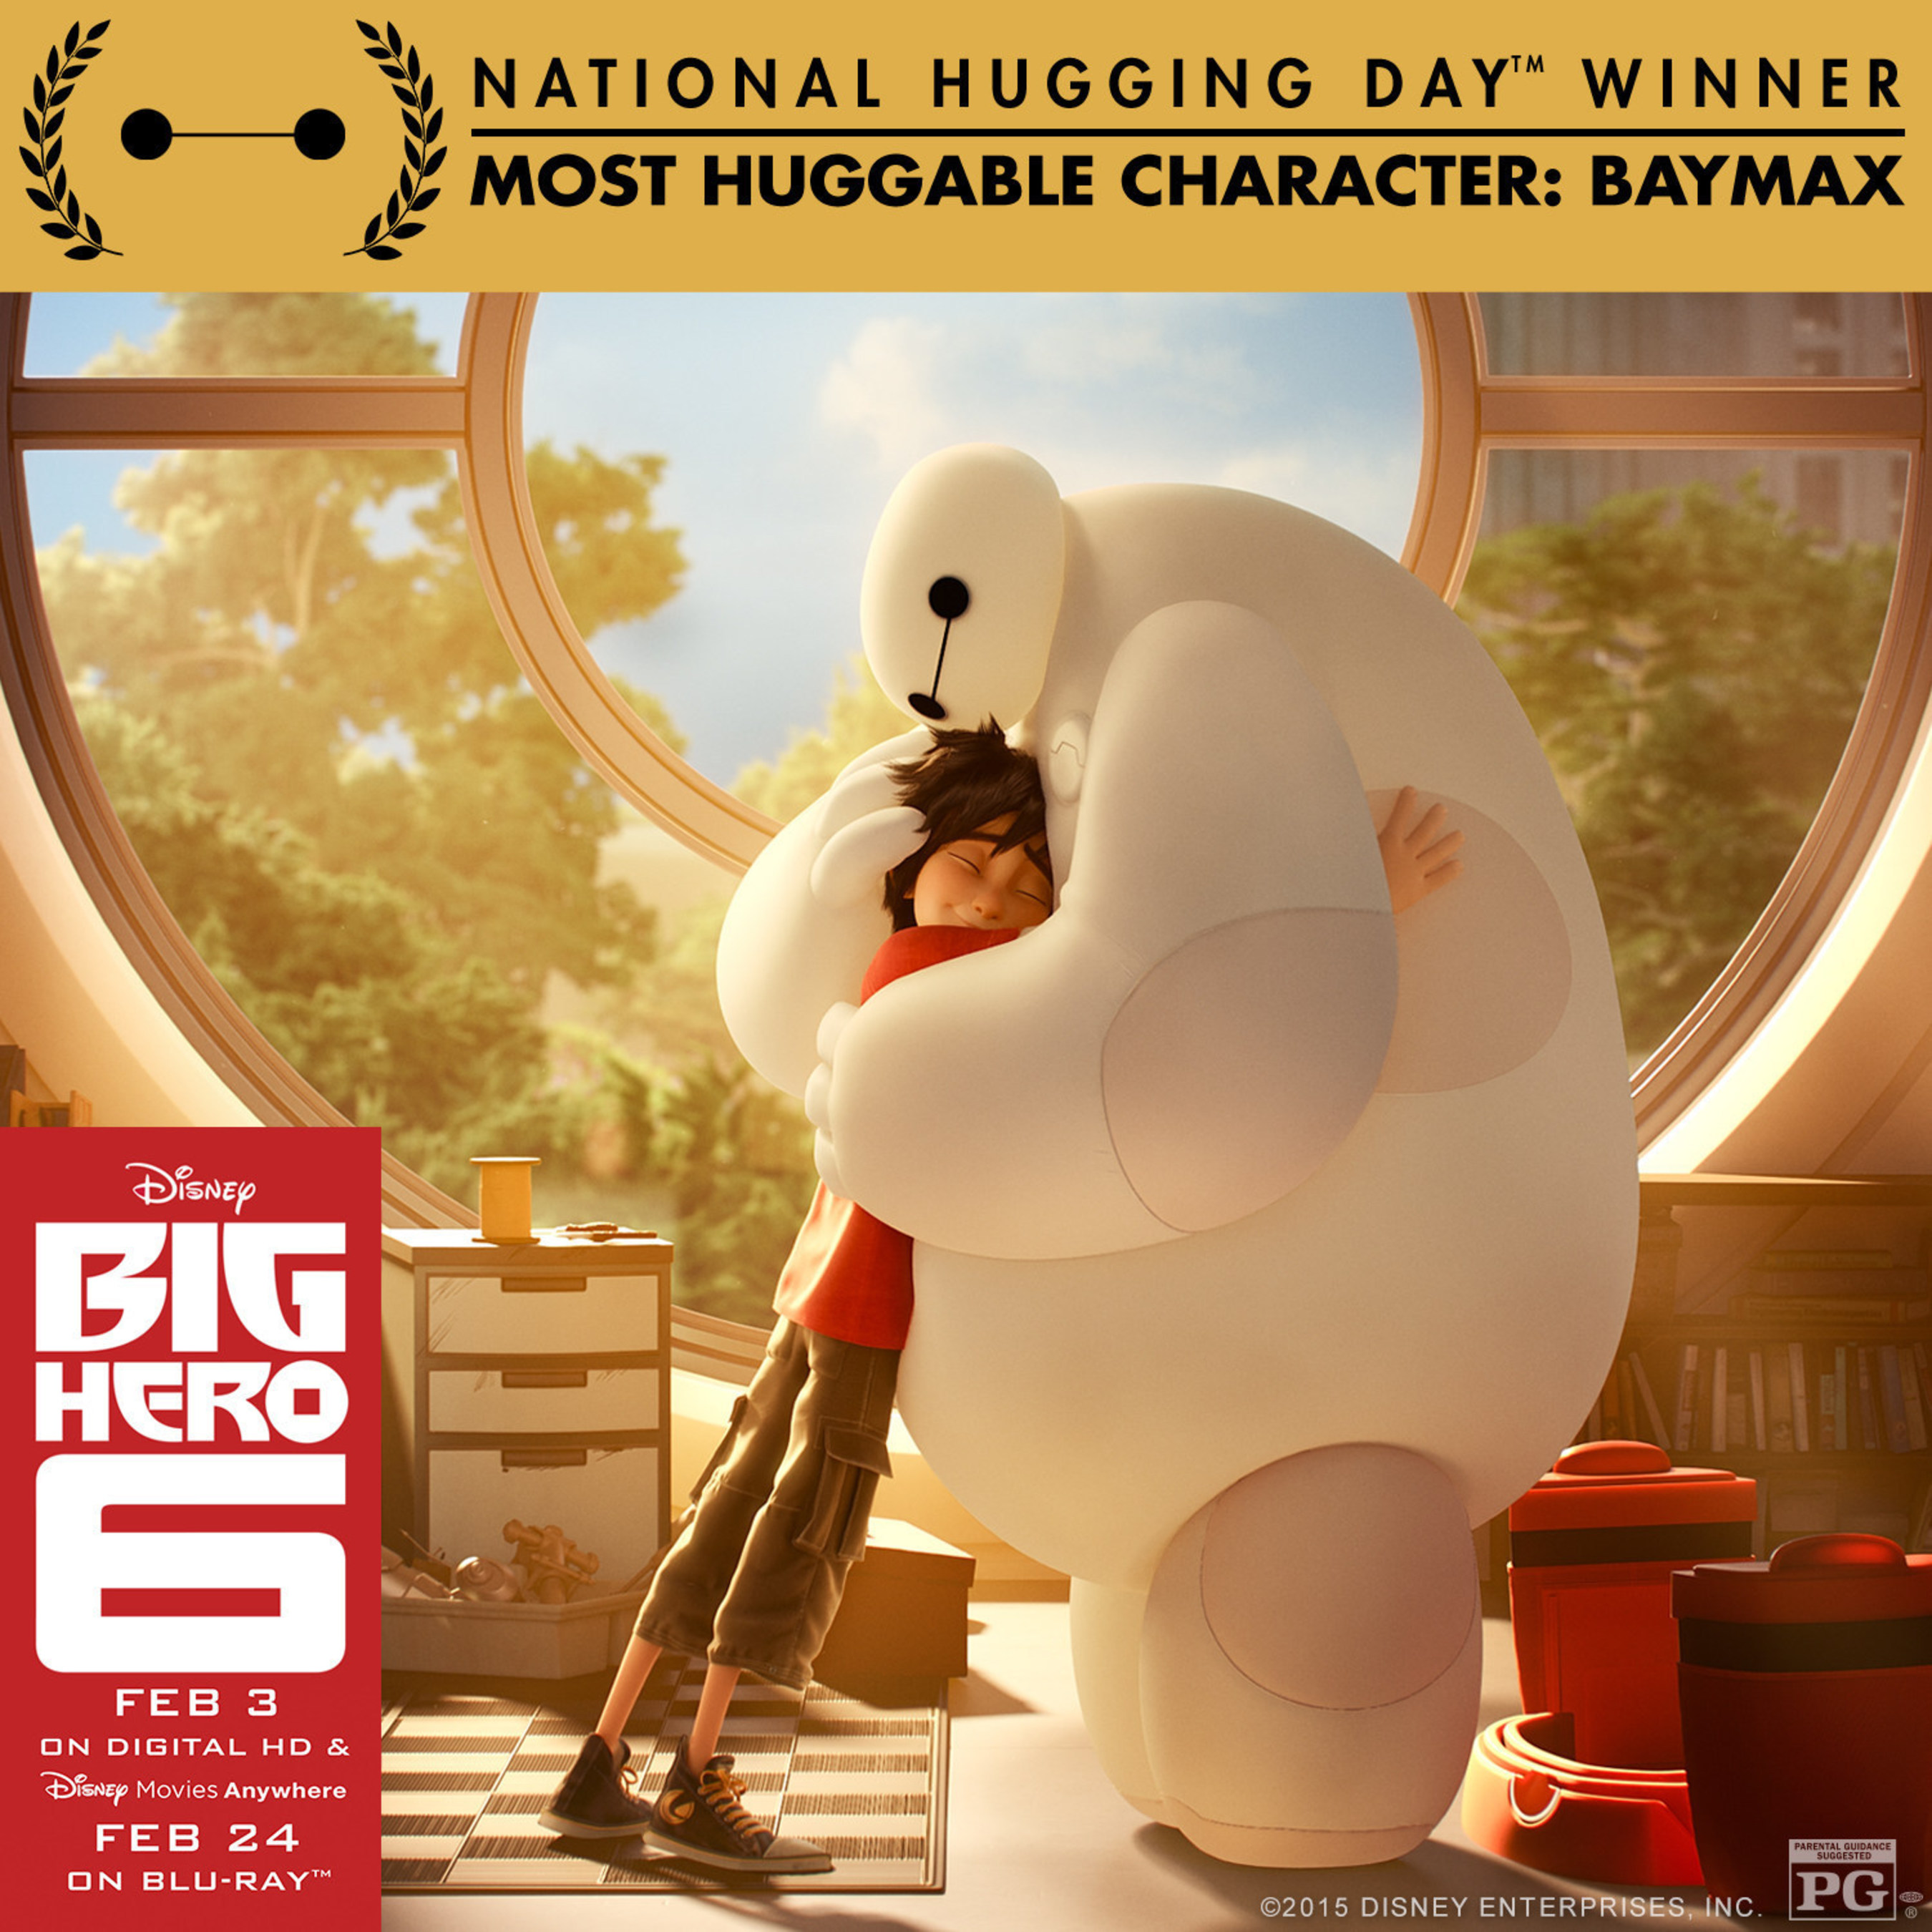 Baymax, Star of Disney's "Big Hero 6," Named Most Huggable Character of 2015 on National Hugging Day(TM)! Available on Digital HD 2/3 and Blu-ray 2/24.